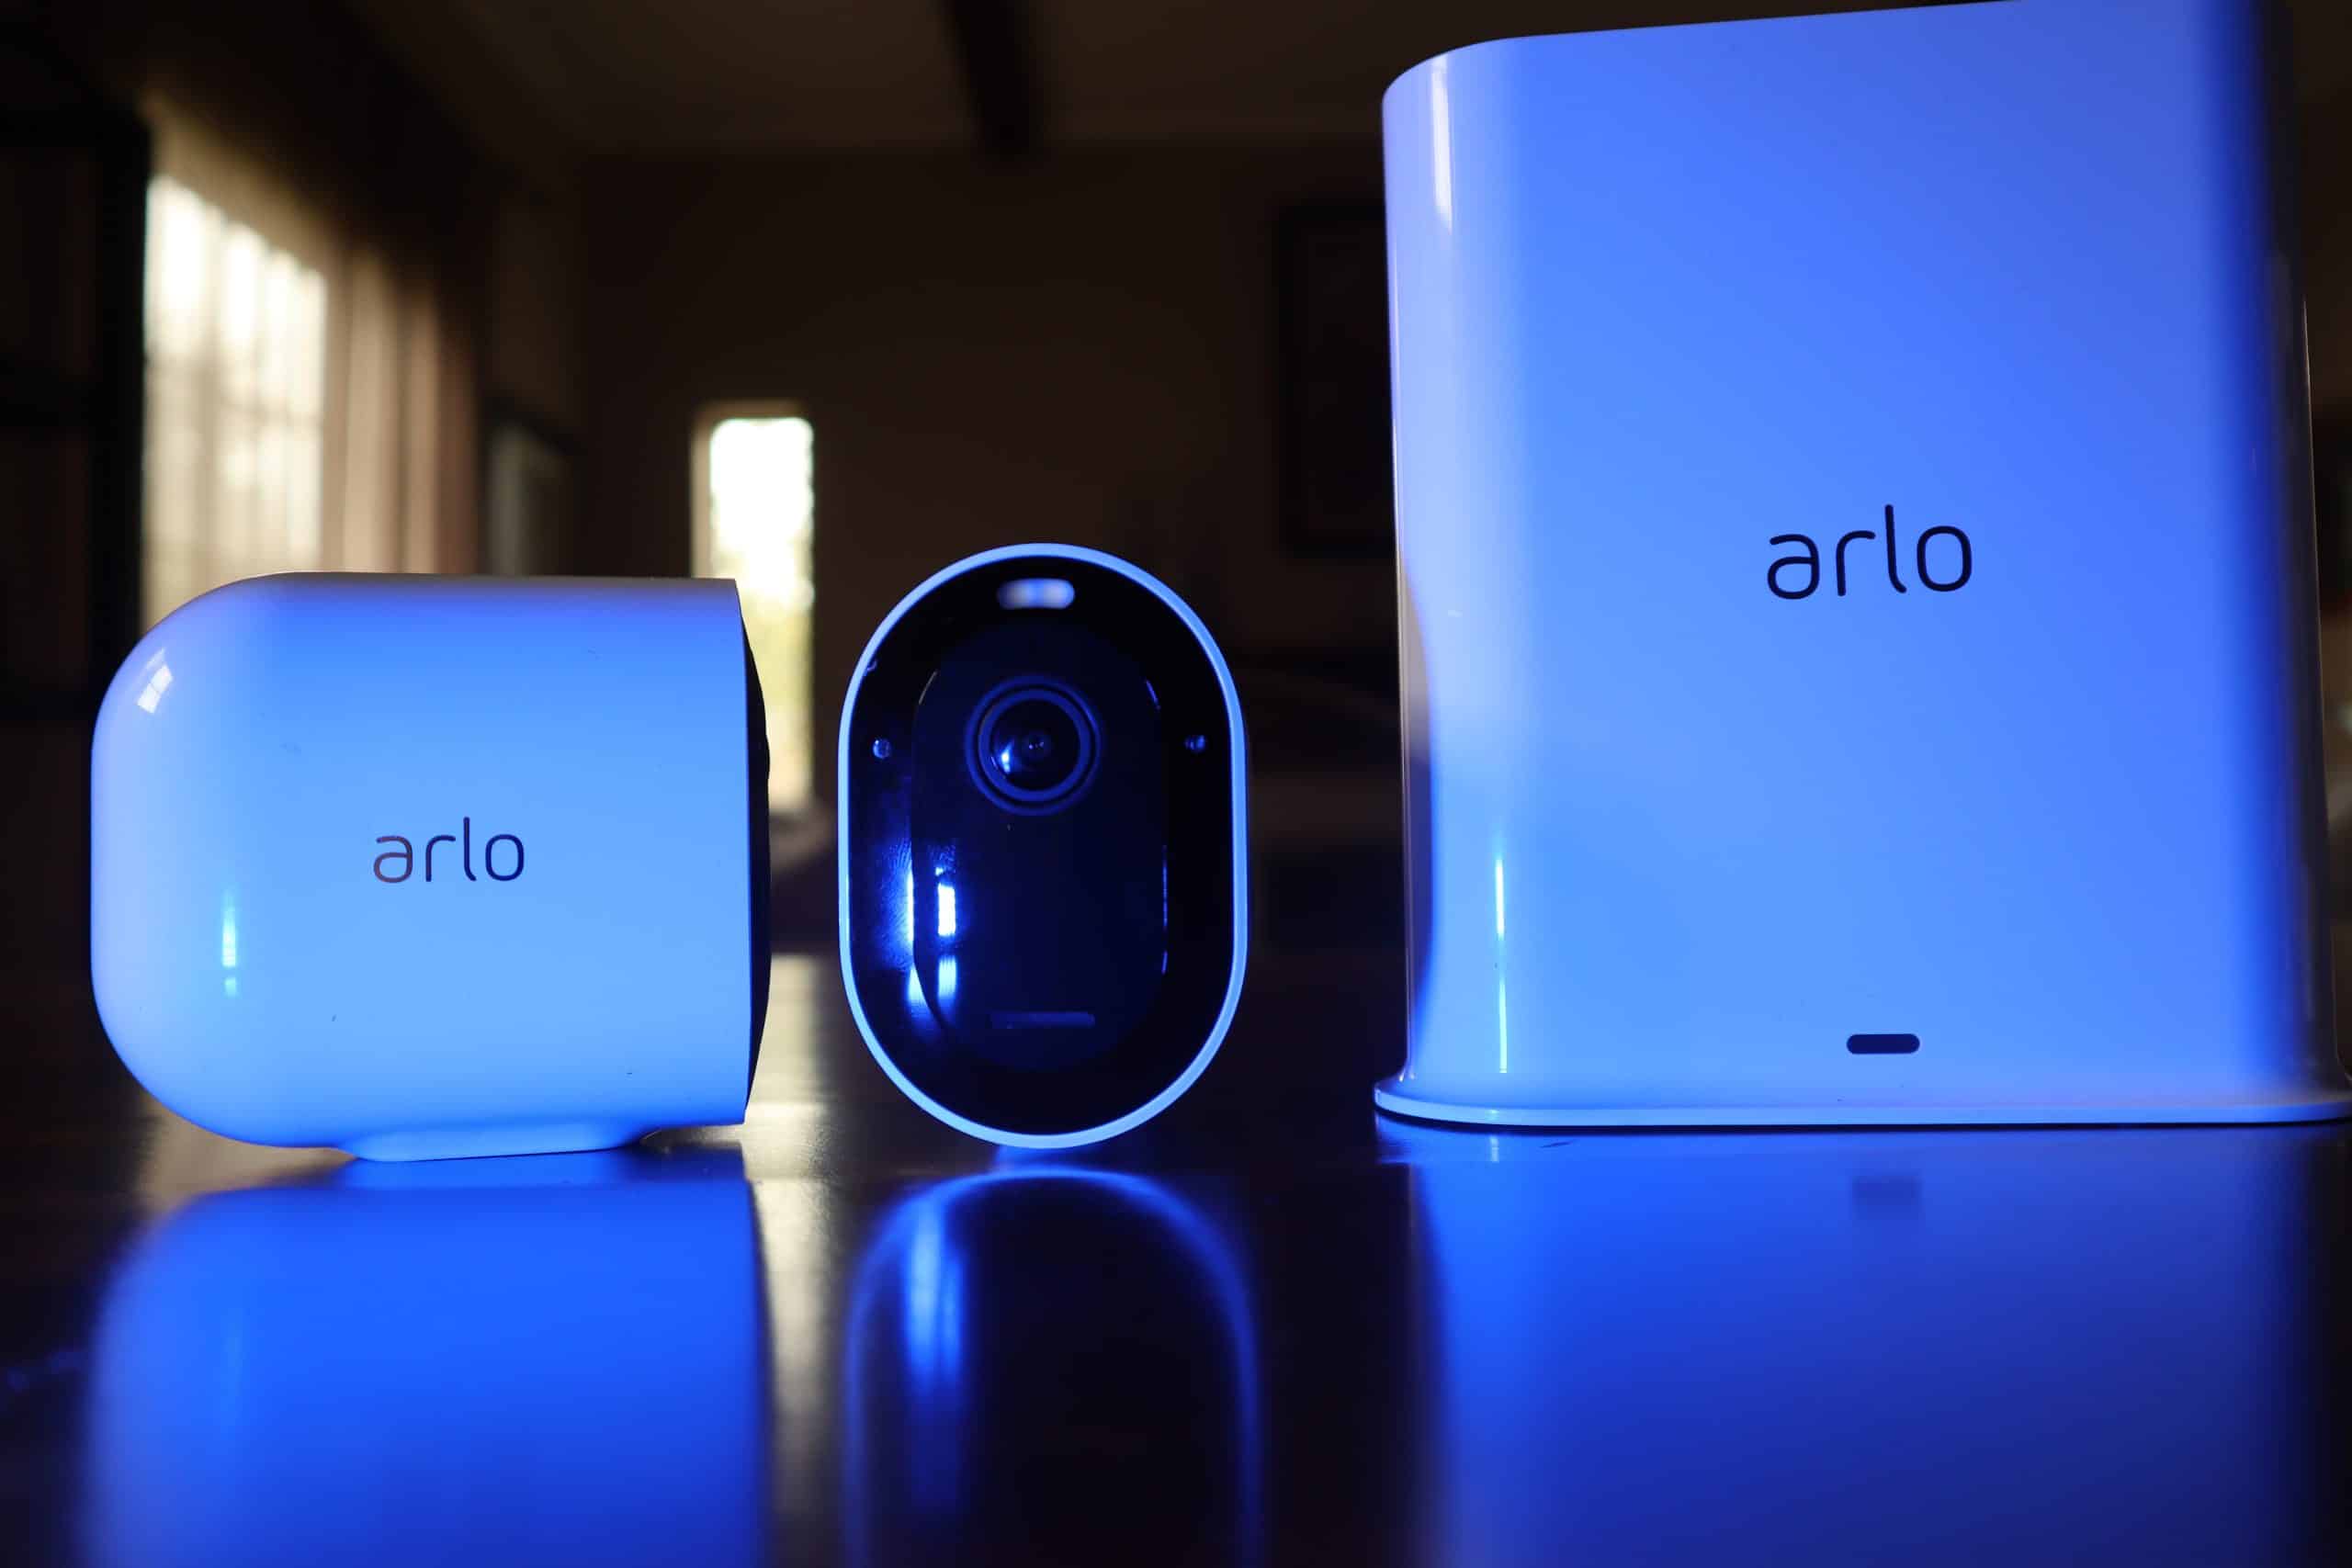 Arlo Pro 3 camera system packs a lot of security power